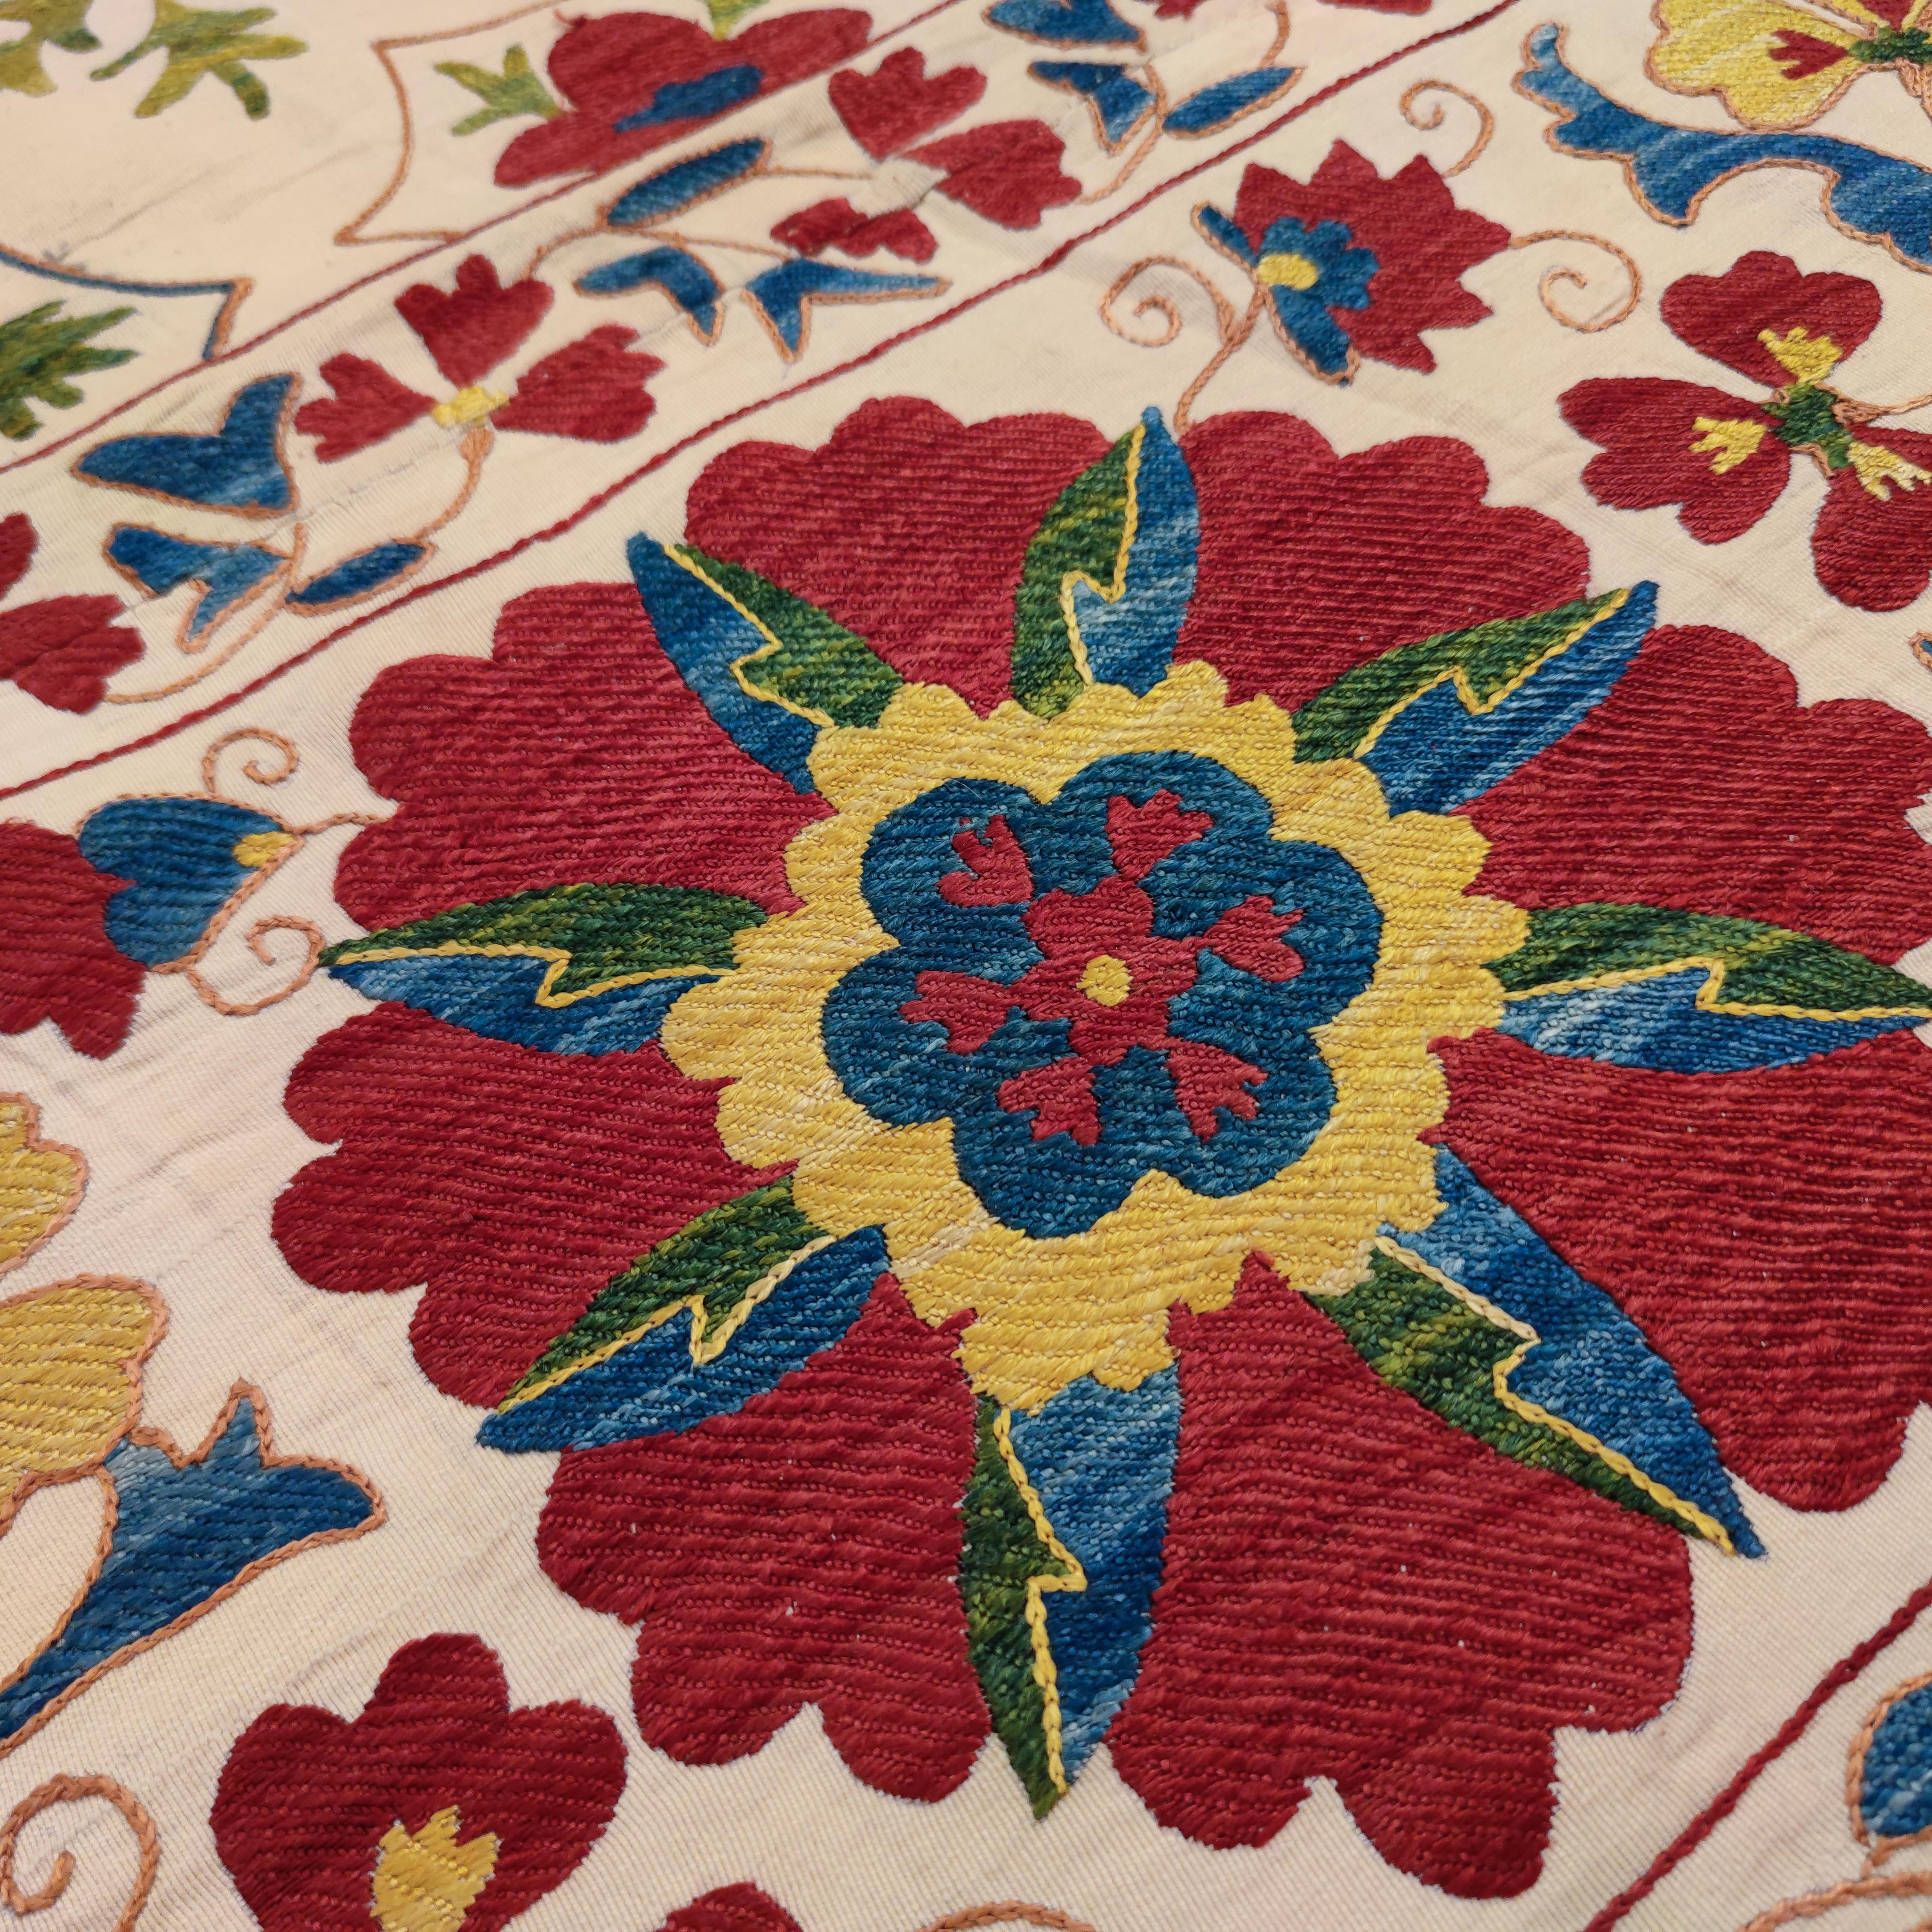 Contemporary Very Fine Silk on Cotton Vintage Central Asian Suzani Embroidery